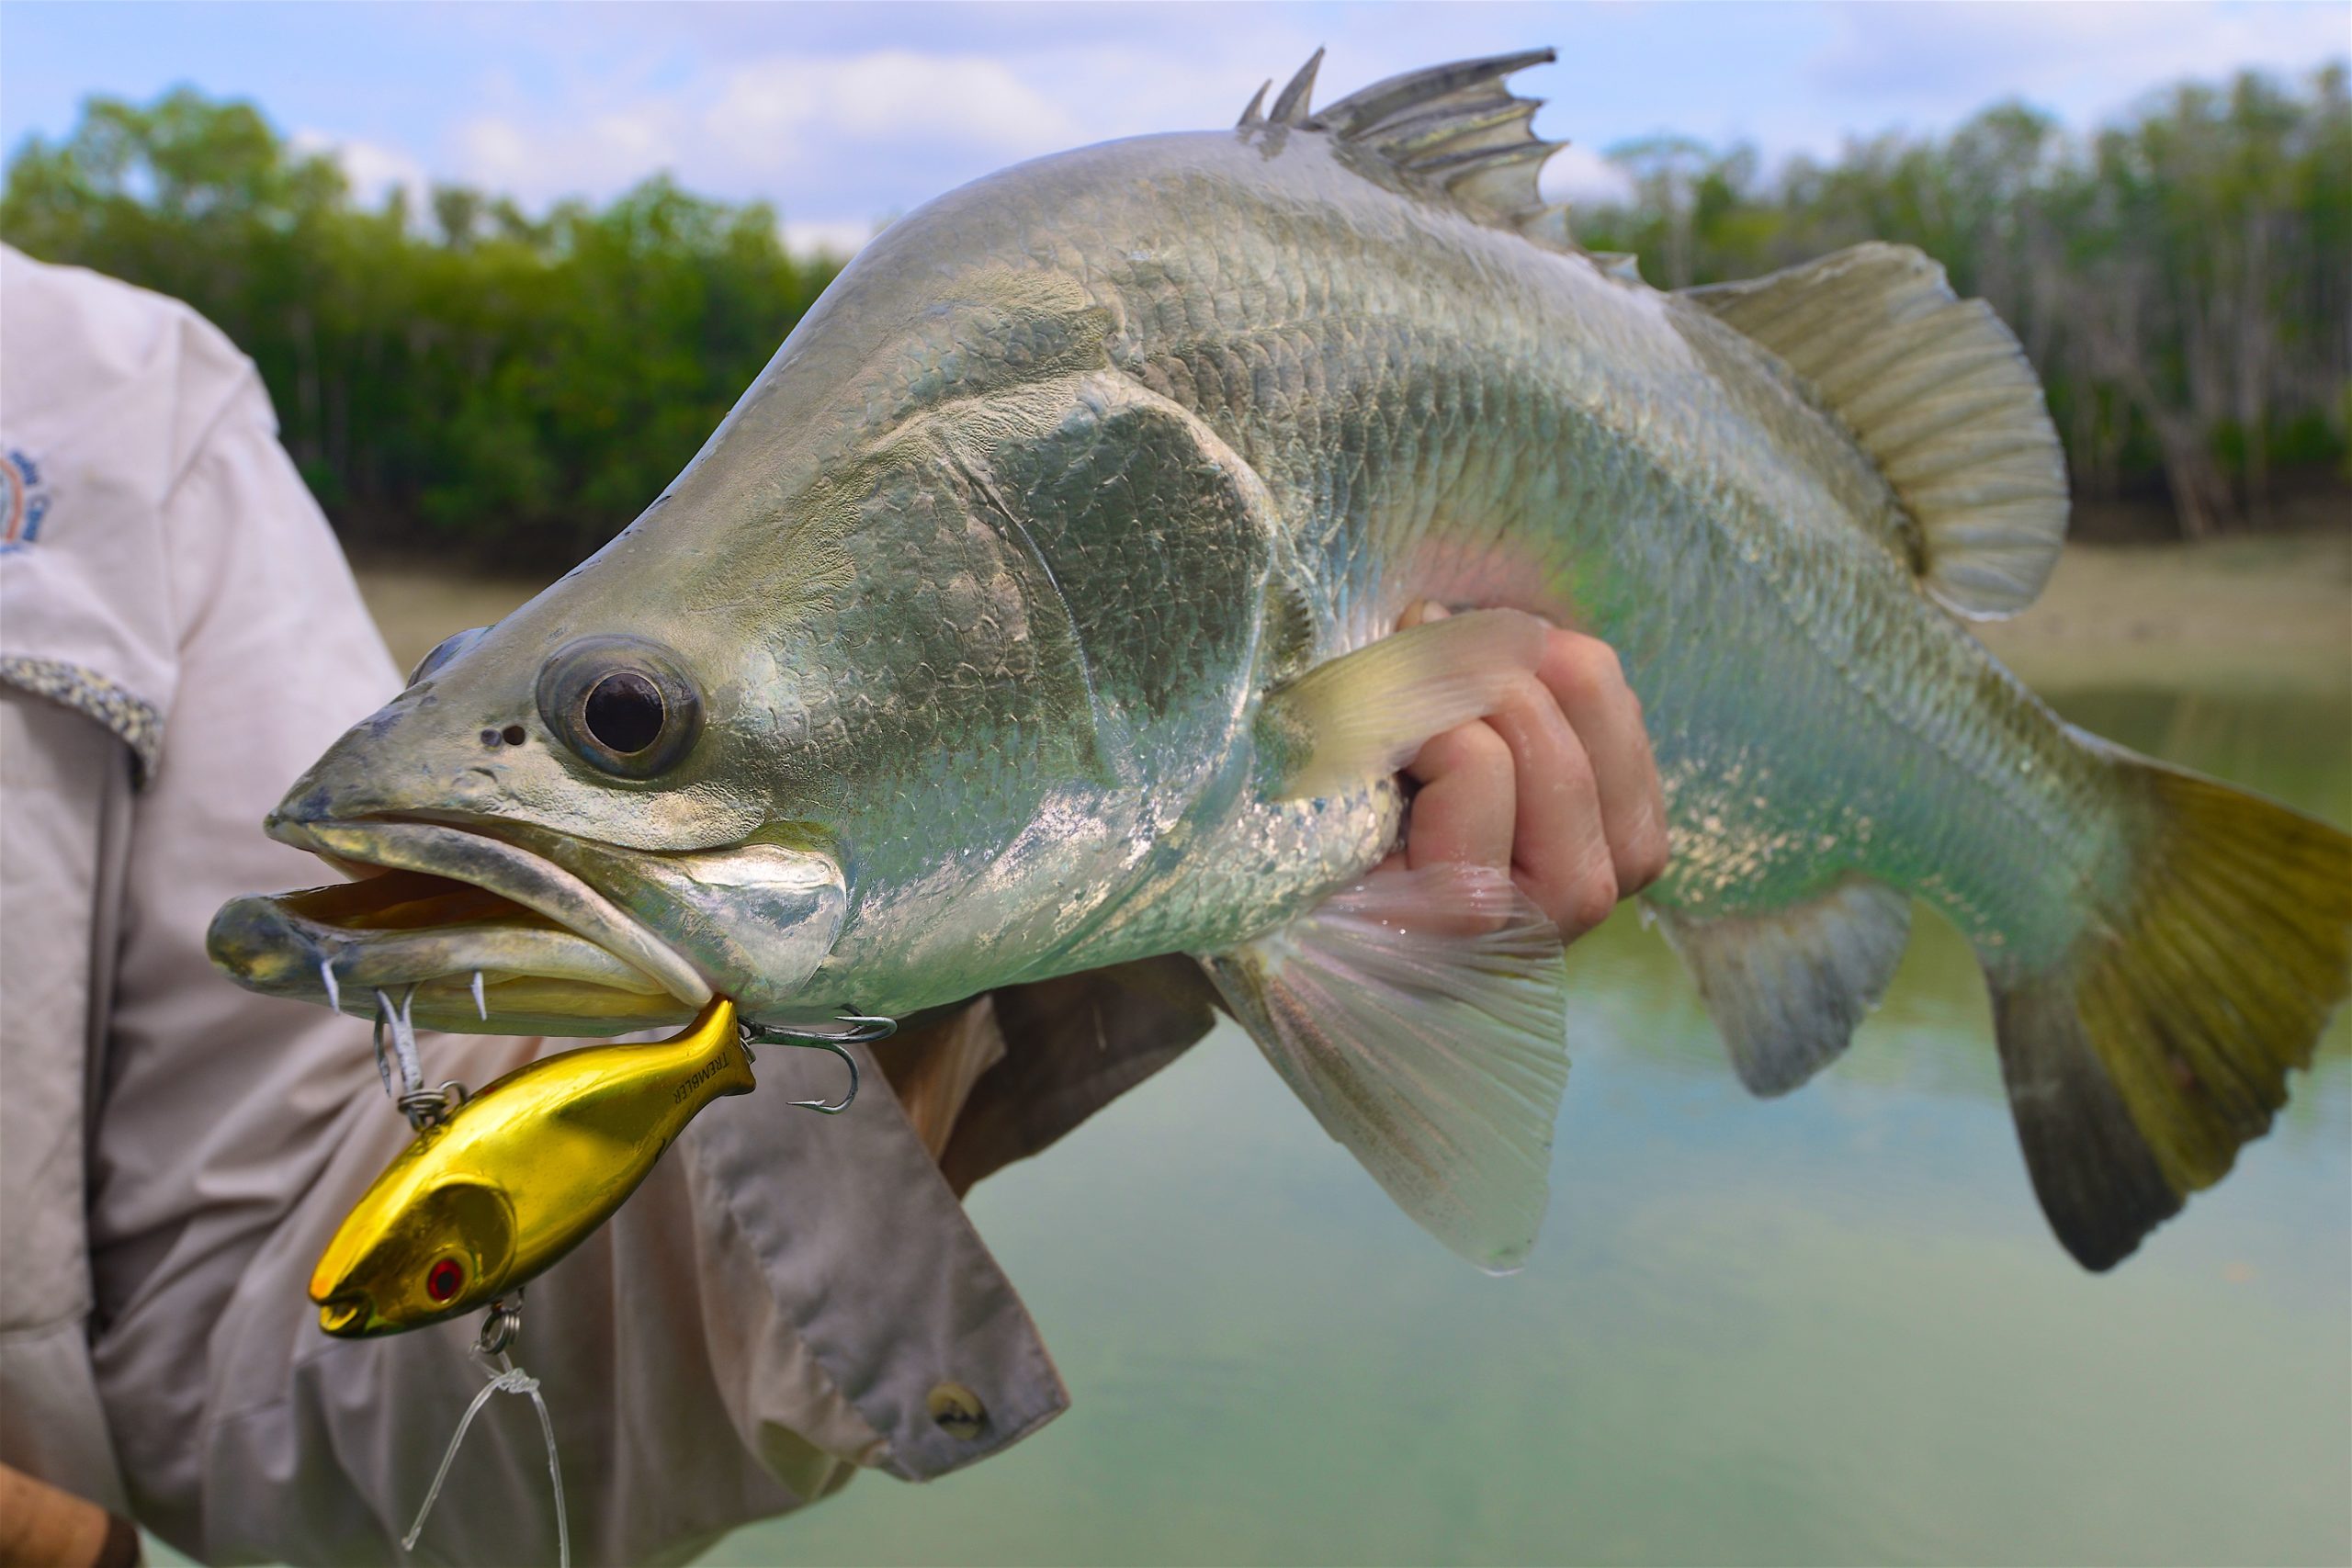 Barramundi with yellow lure in mouth